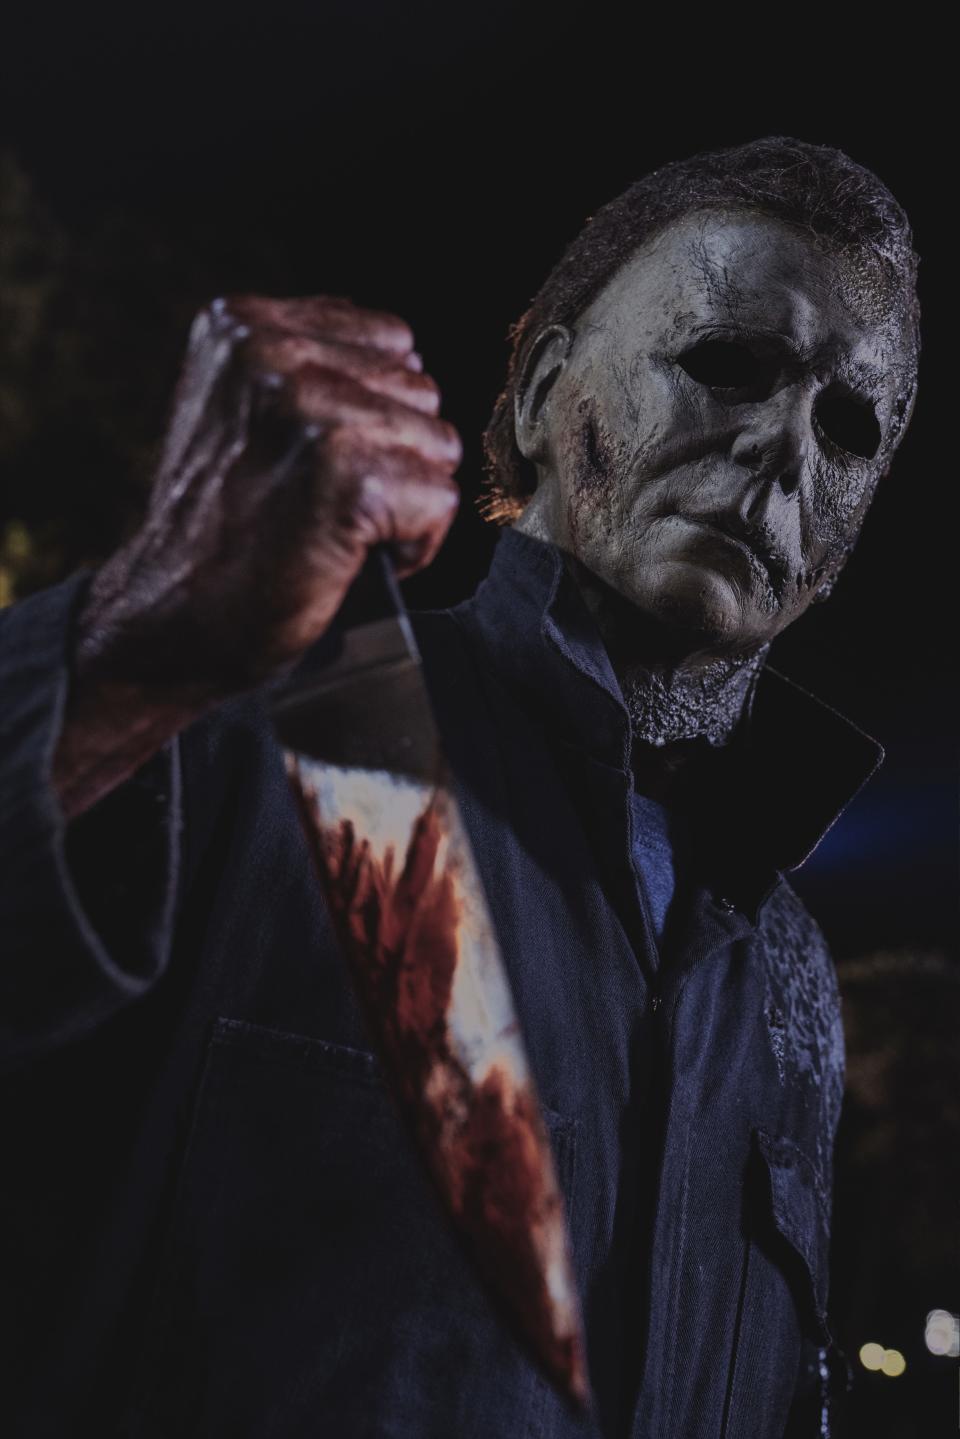 John Carpenter's iconic killer Michael Myers, also known as "The Shape," is set to fight Laurie Strode one last time in "Halloween Ends" set for release on Oct. 14, 2022.